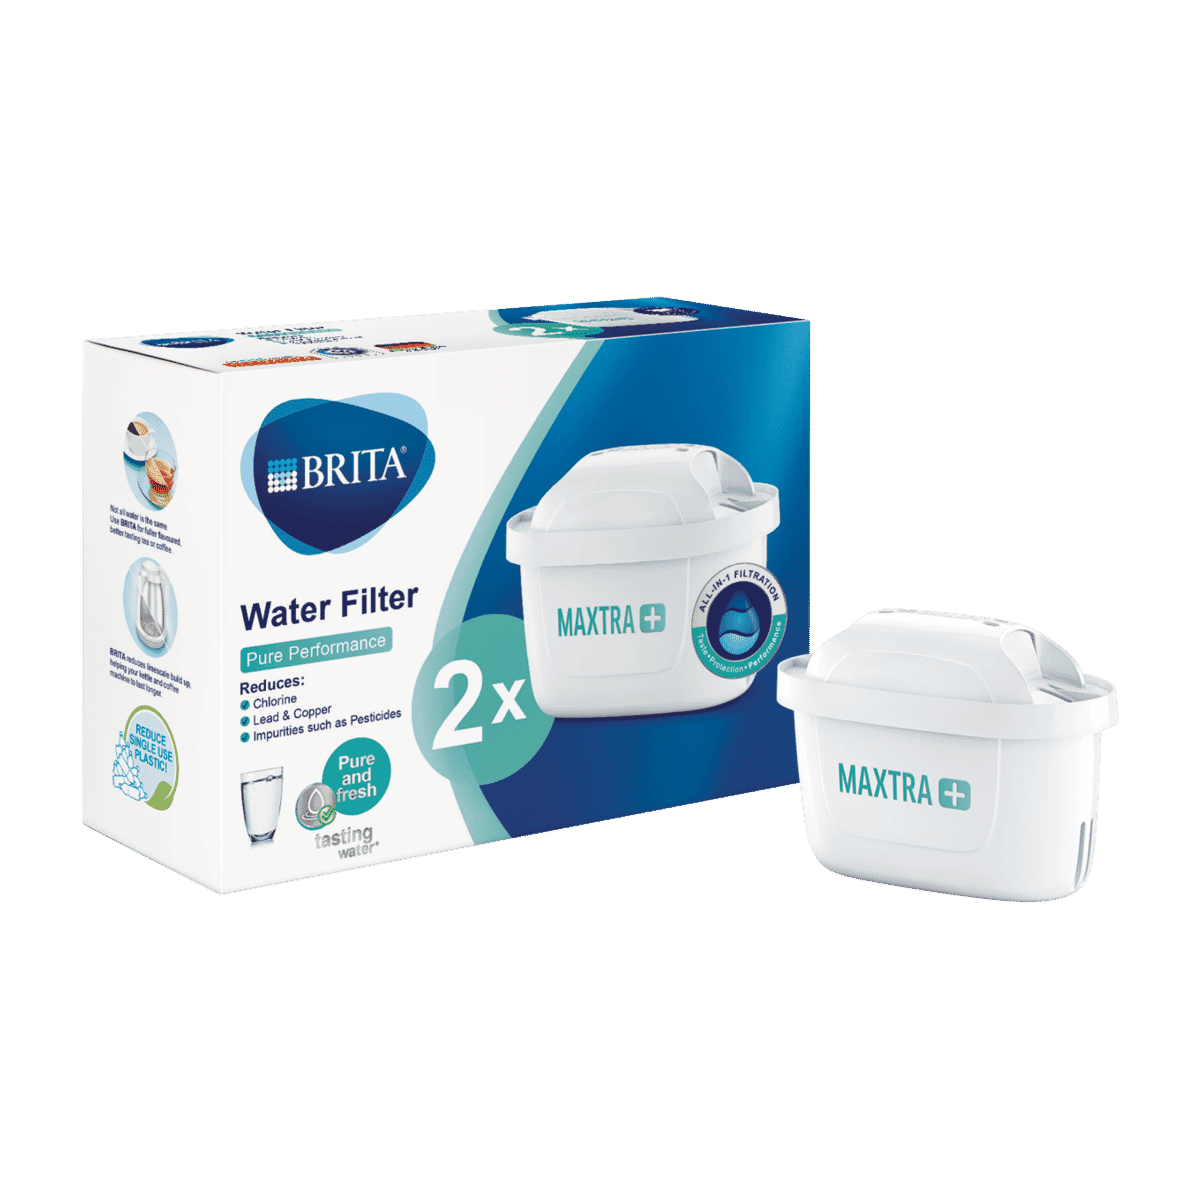 BRITA MAXTRA PRO All-in-1 Water Filter Cartridge 4 Pack (NEW) - Original  BRITA refill reducing impurities, chlorine, pesticides and limescale for  tap